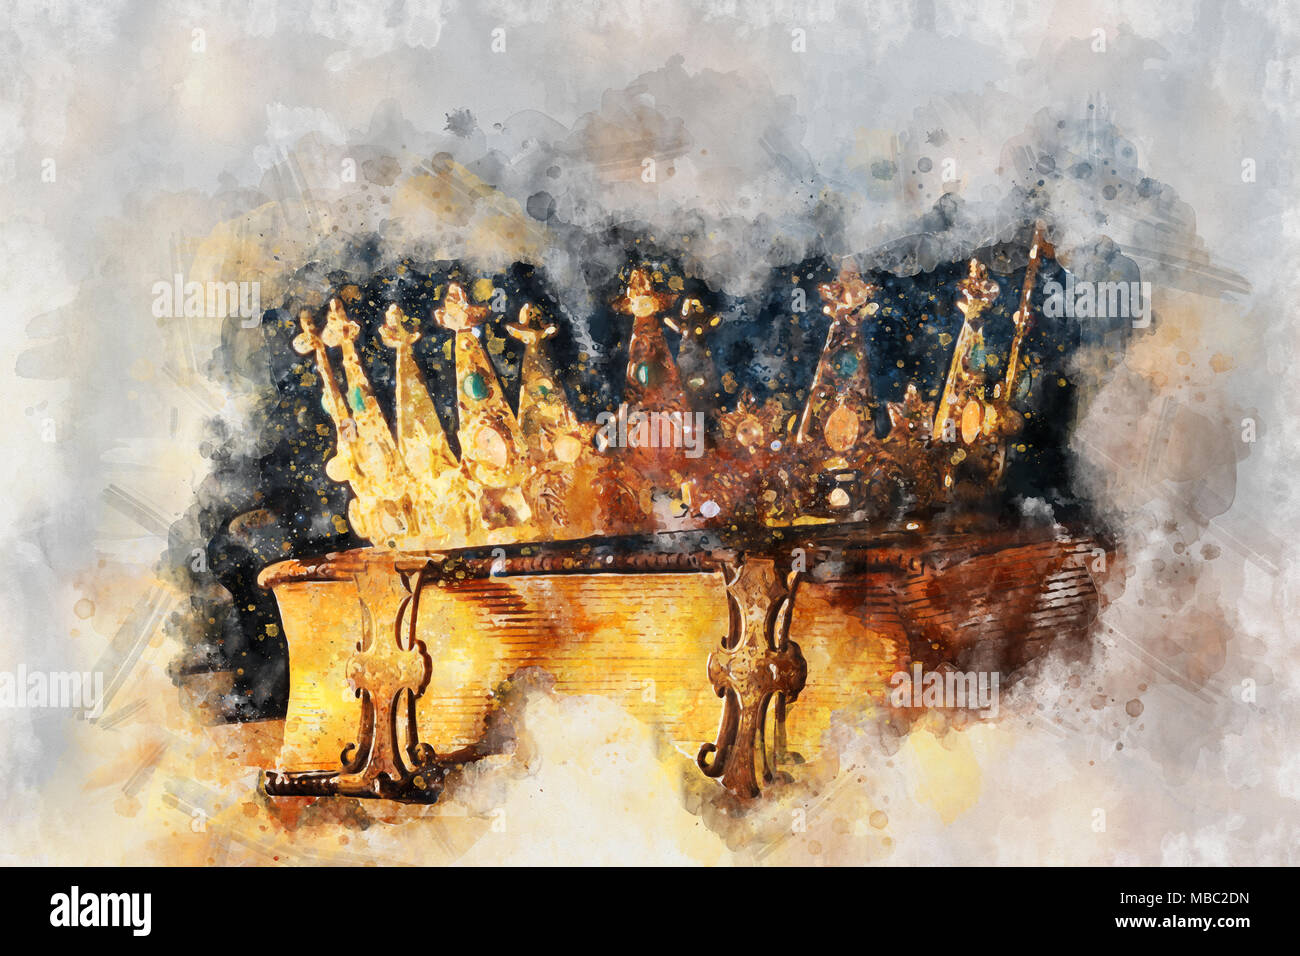 watercolor style illustration of beautiful queen/king crown. fantasy medieval period Stock Photo